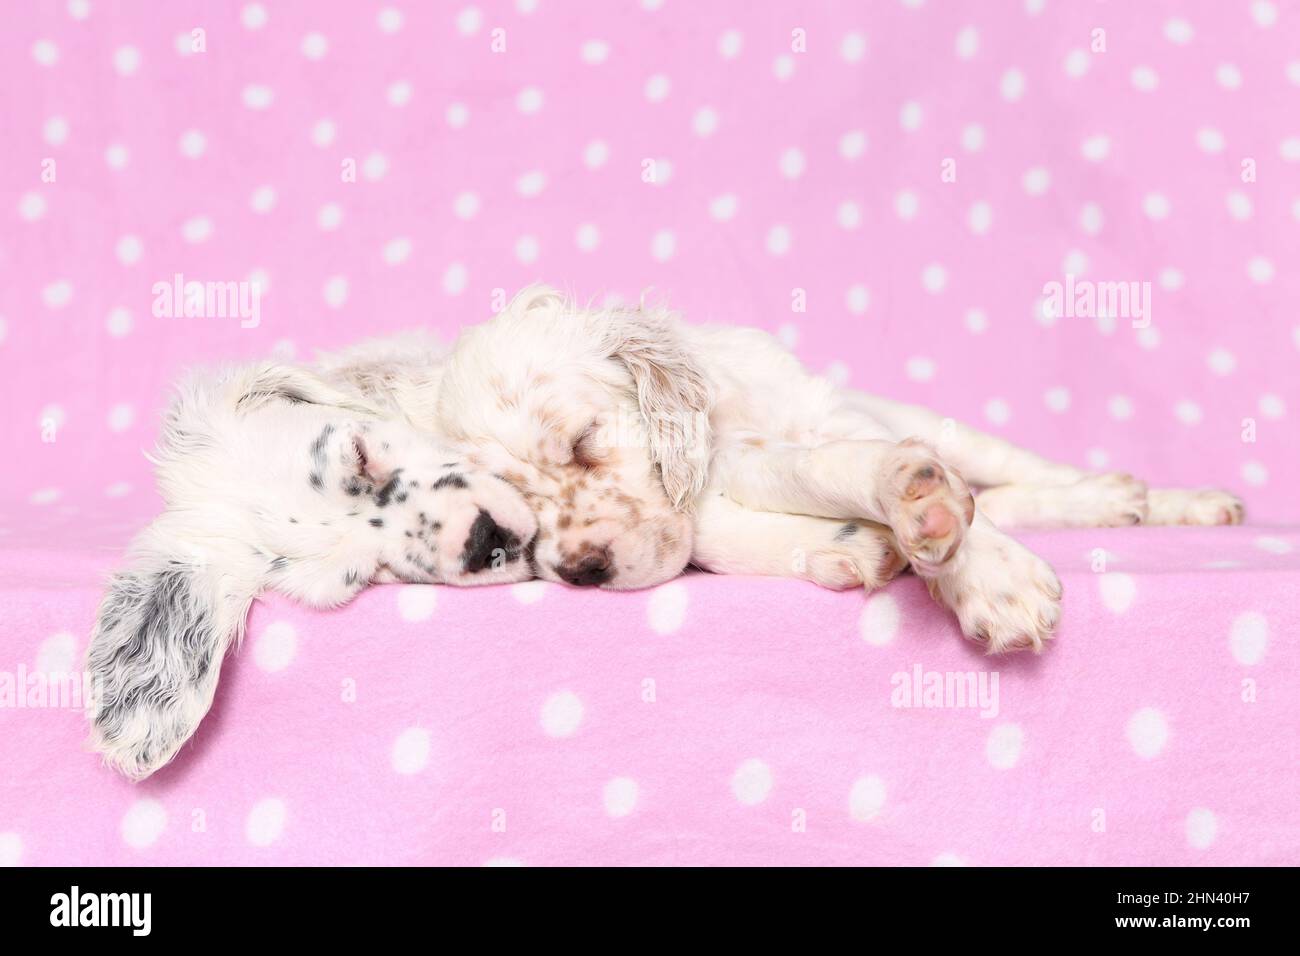 English Setter. Two puppies sleeping on a pink blanket with polka dots. Germany Stock Photo